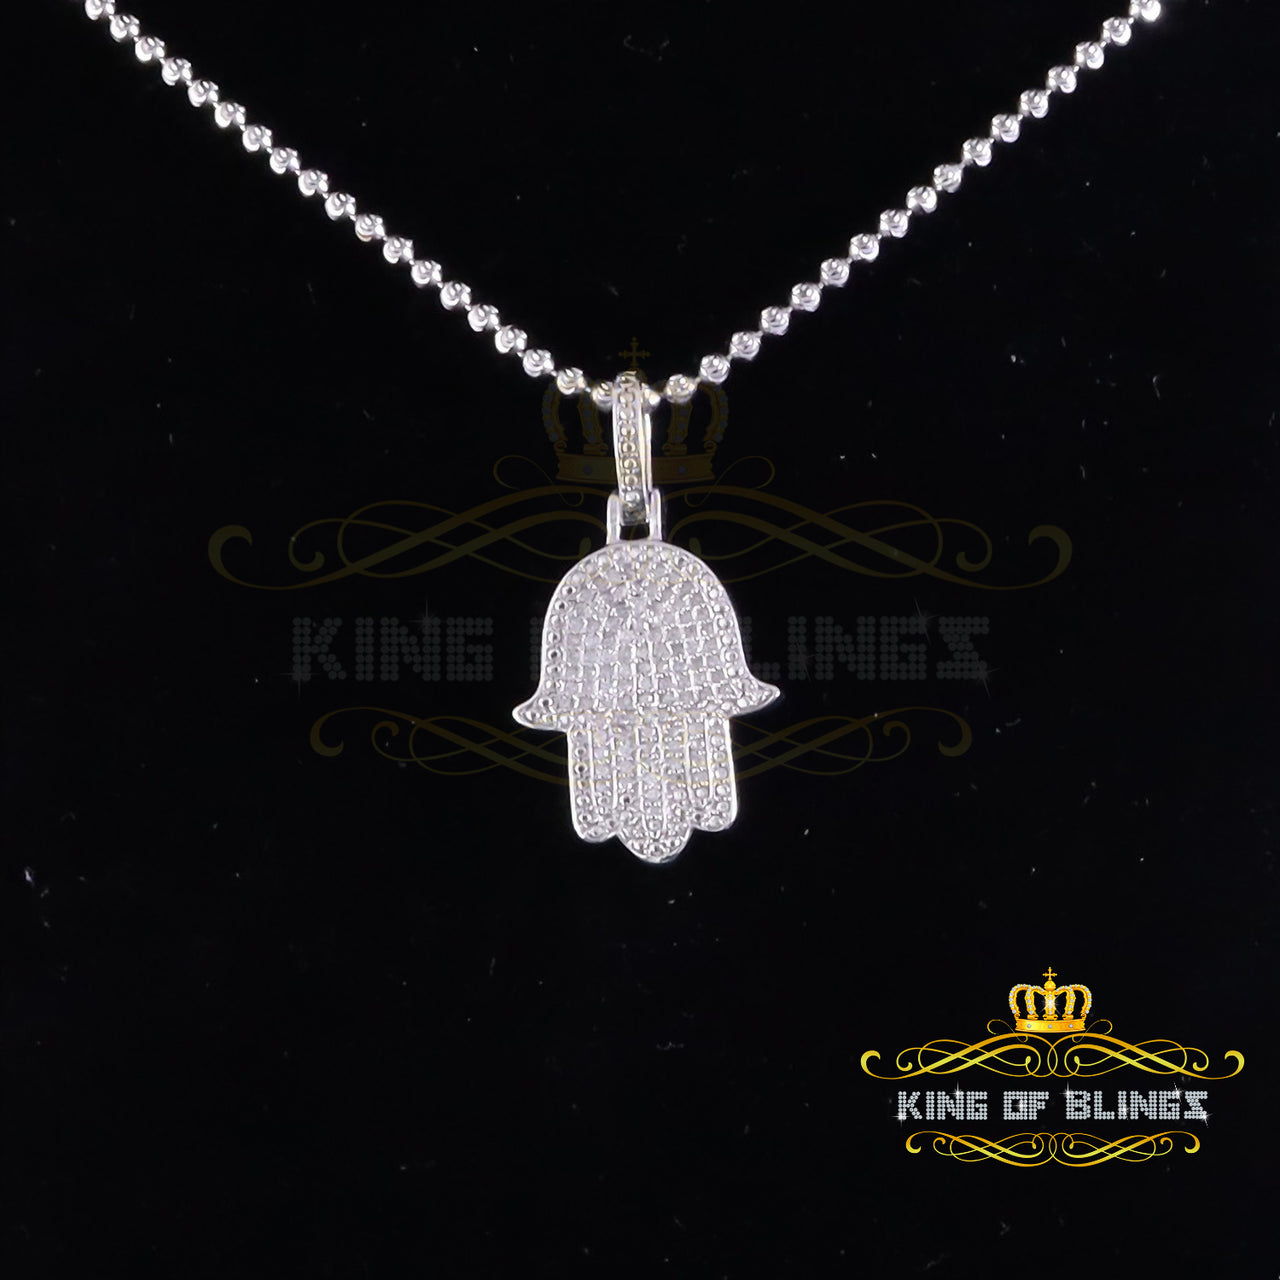 King Of Bling's Real 0.33ct Diamond 925 Sterling Silver HAMSA Charm Necklace Pendant in White